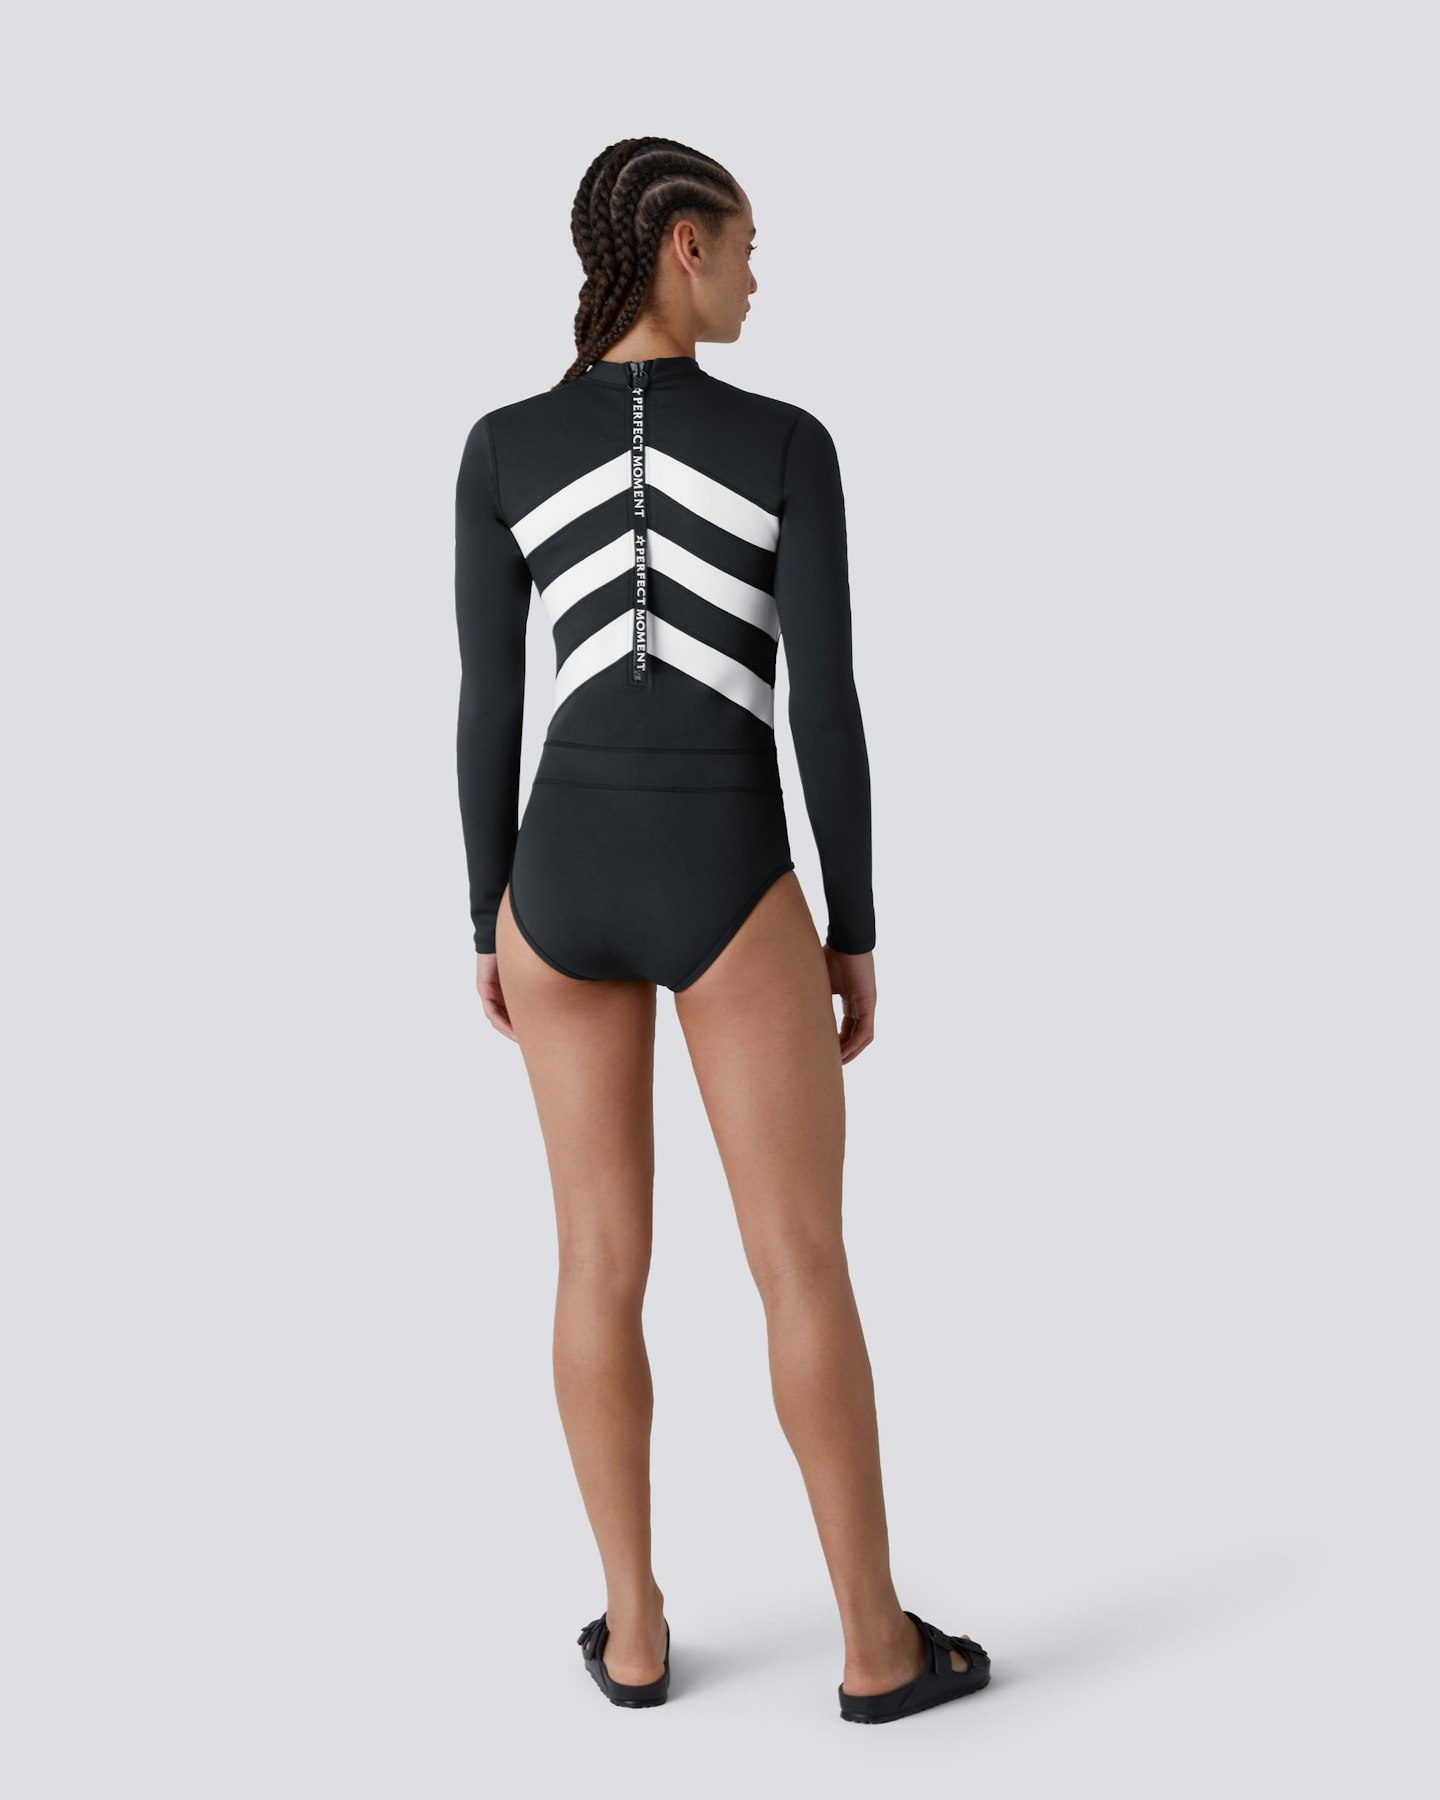 Imok Wetsuit 2